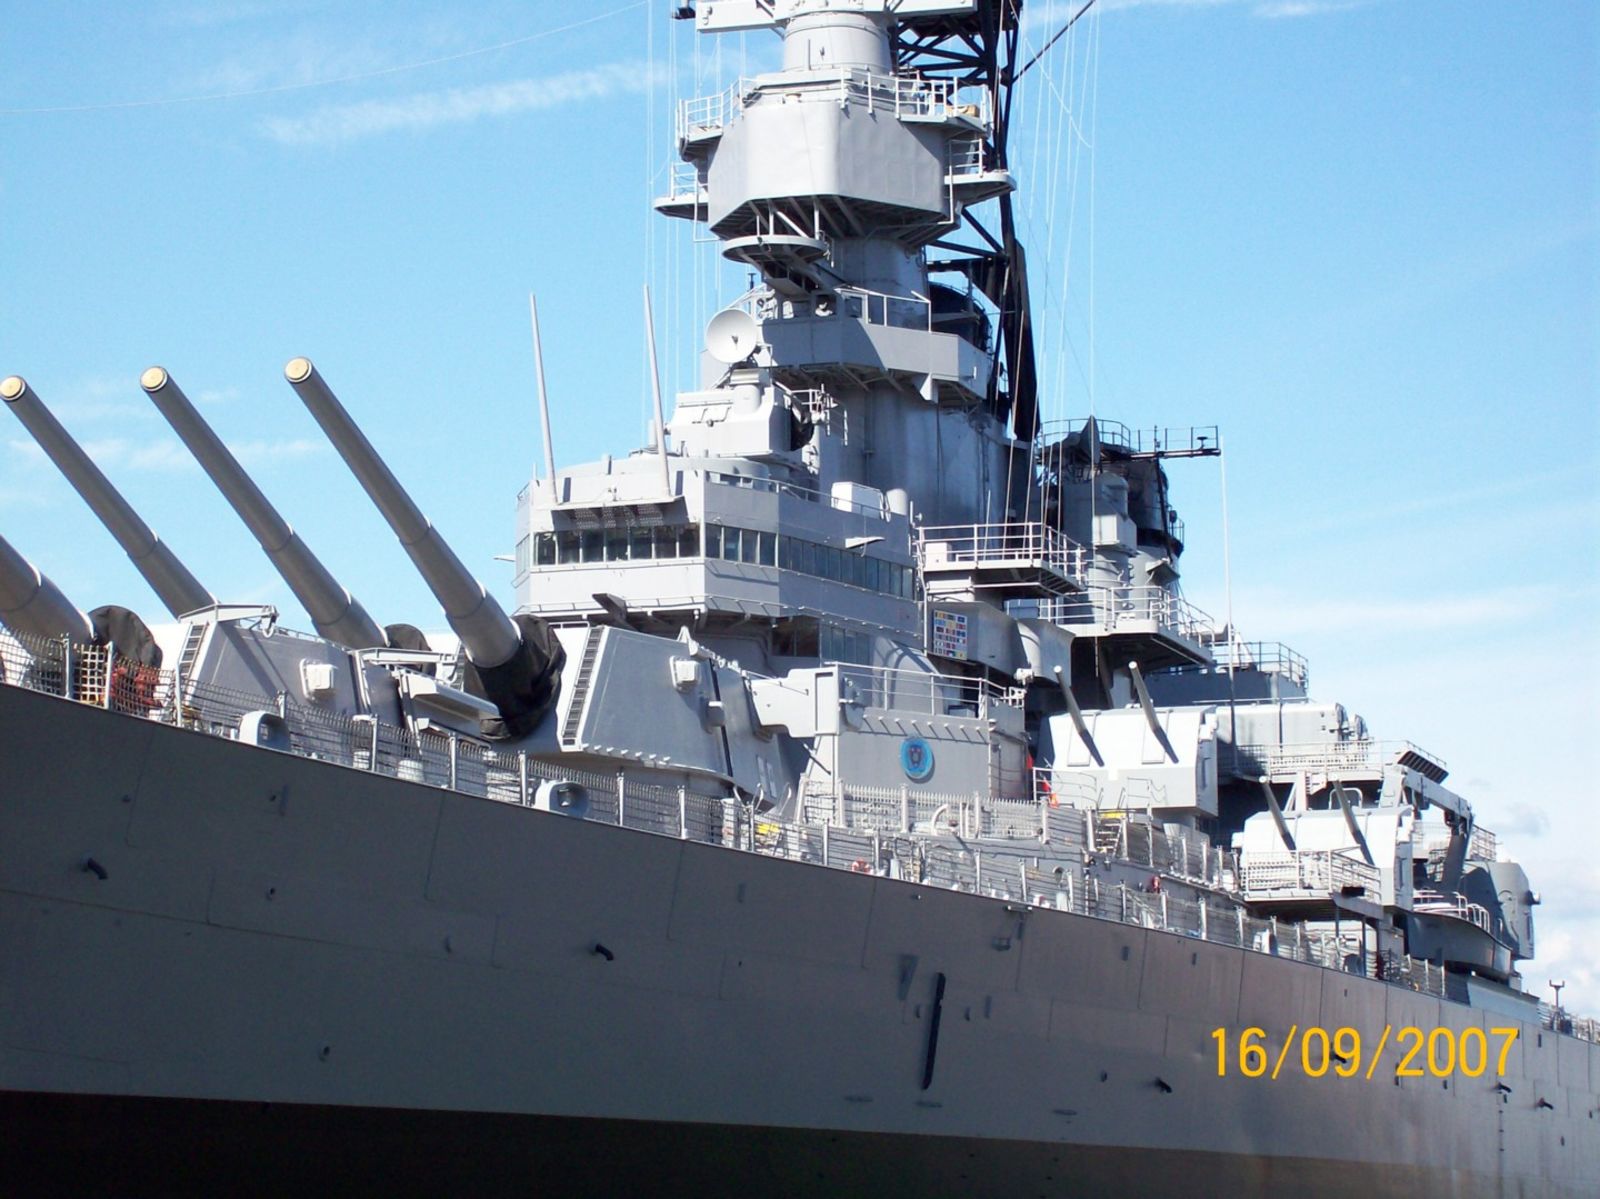 Wisky’s port side, showing off one of her four 16&quot; gun turrets as well as several 5&quot; turrets and her bridge